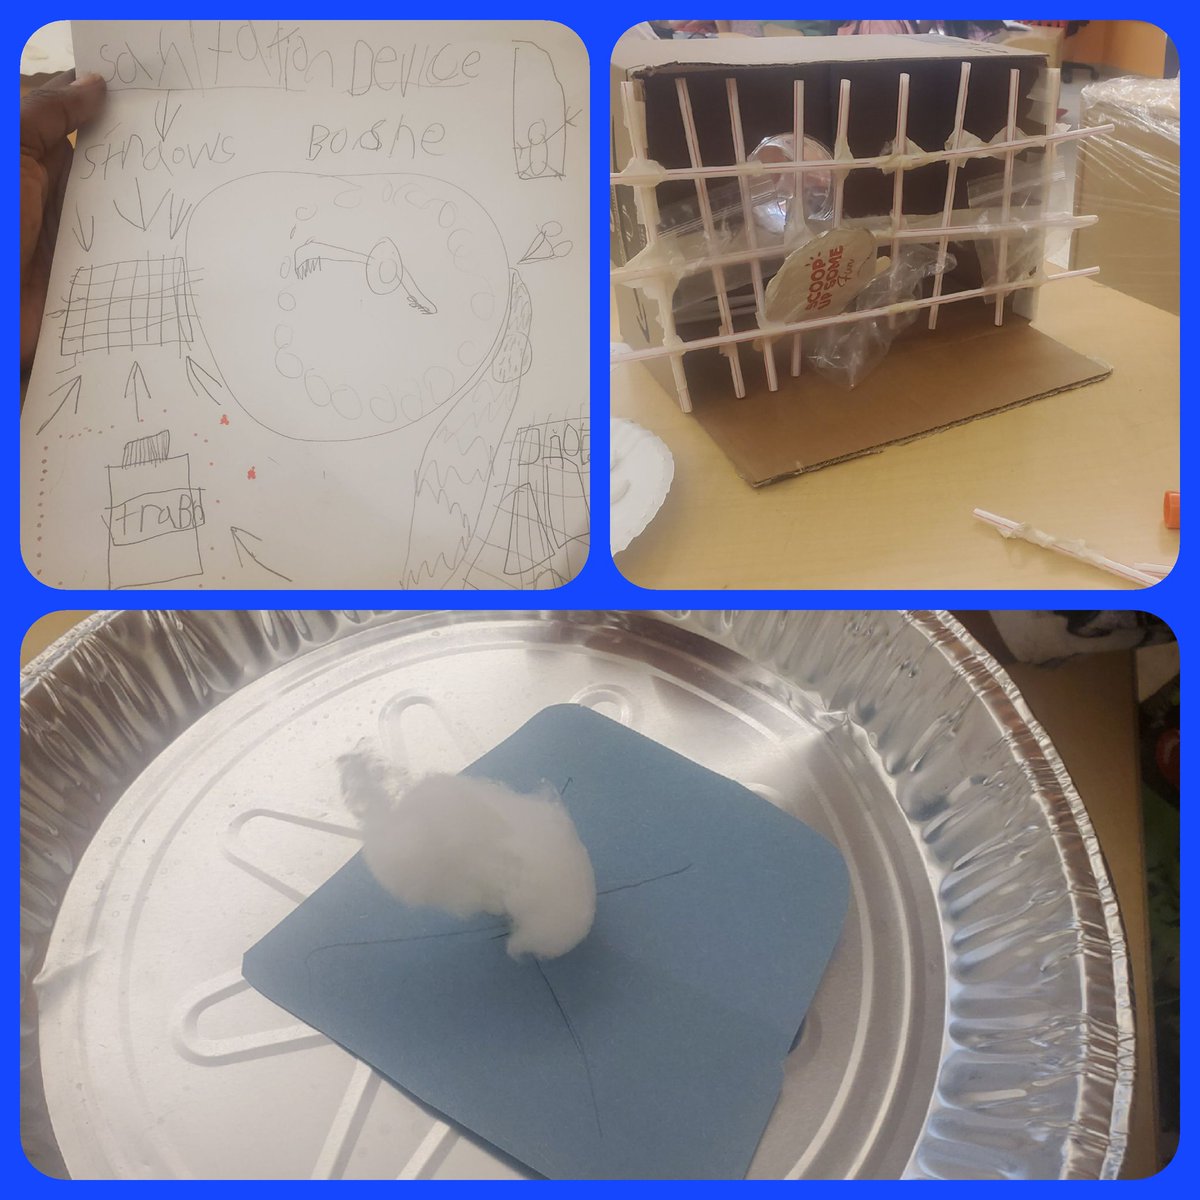 There is WHAT in our water? Grades 1-2 S’s at @Kimberl39627834 & @LivingstonNBPS planning and creating air filters and sanitation traps! Excited to see the final products next week! @ENunez___ @nbpschools